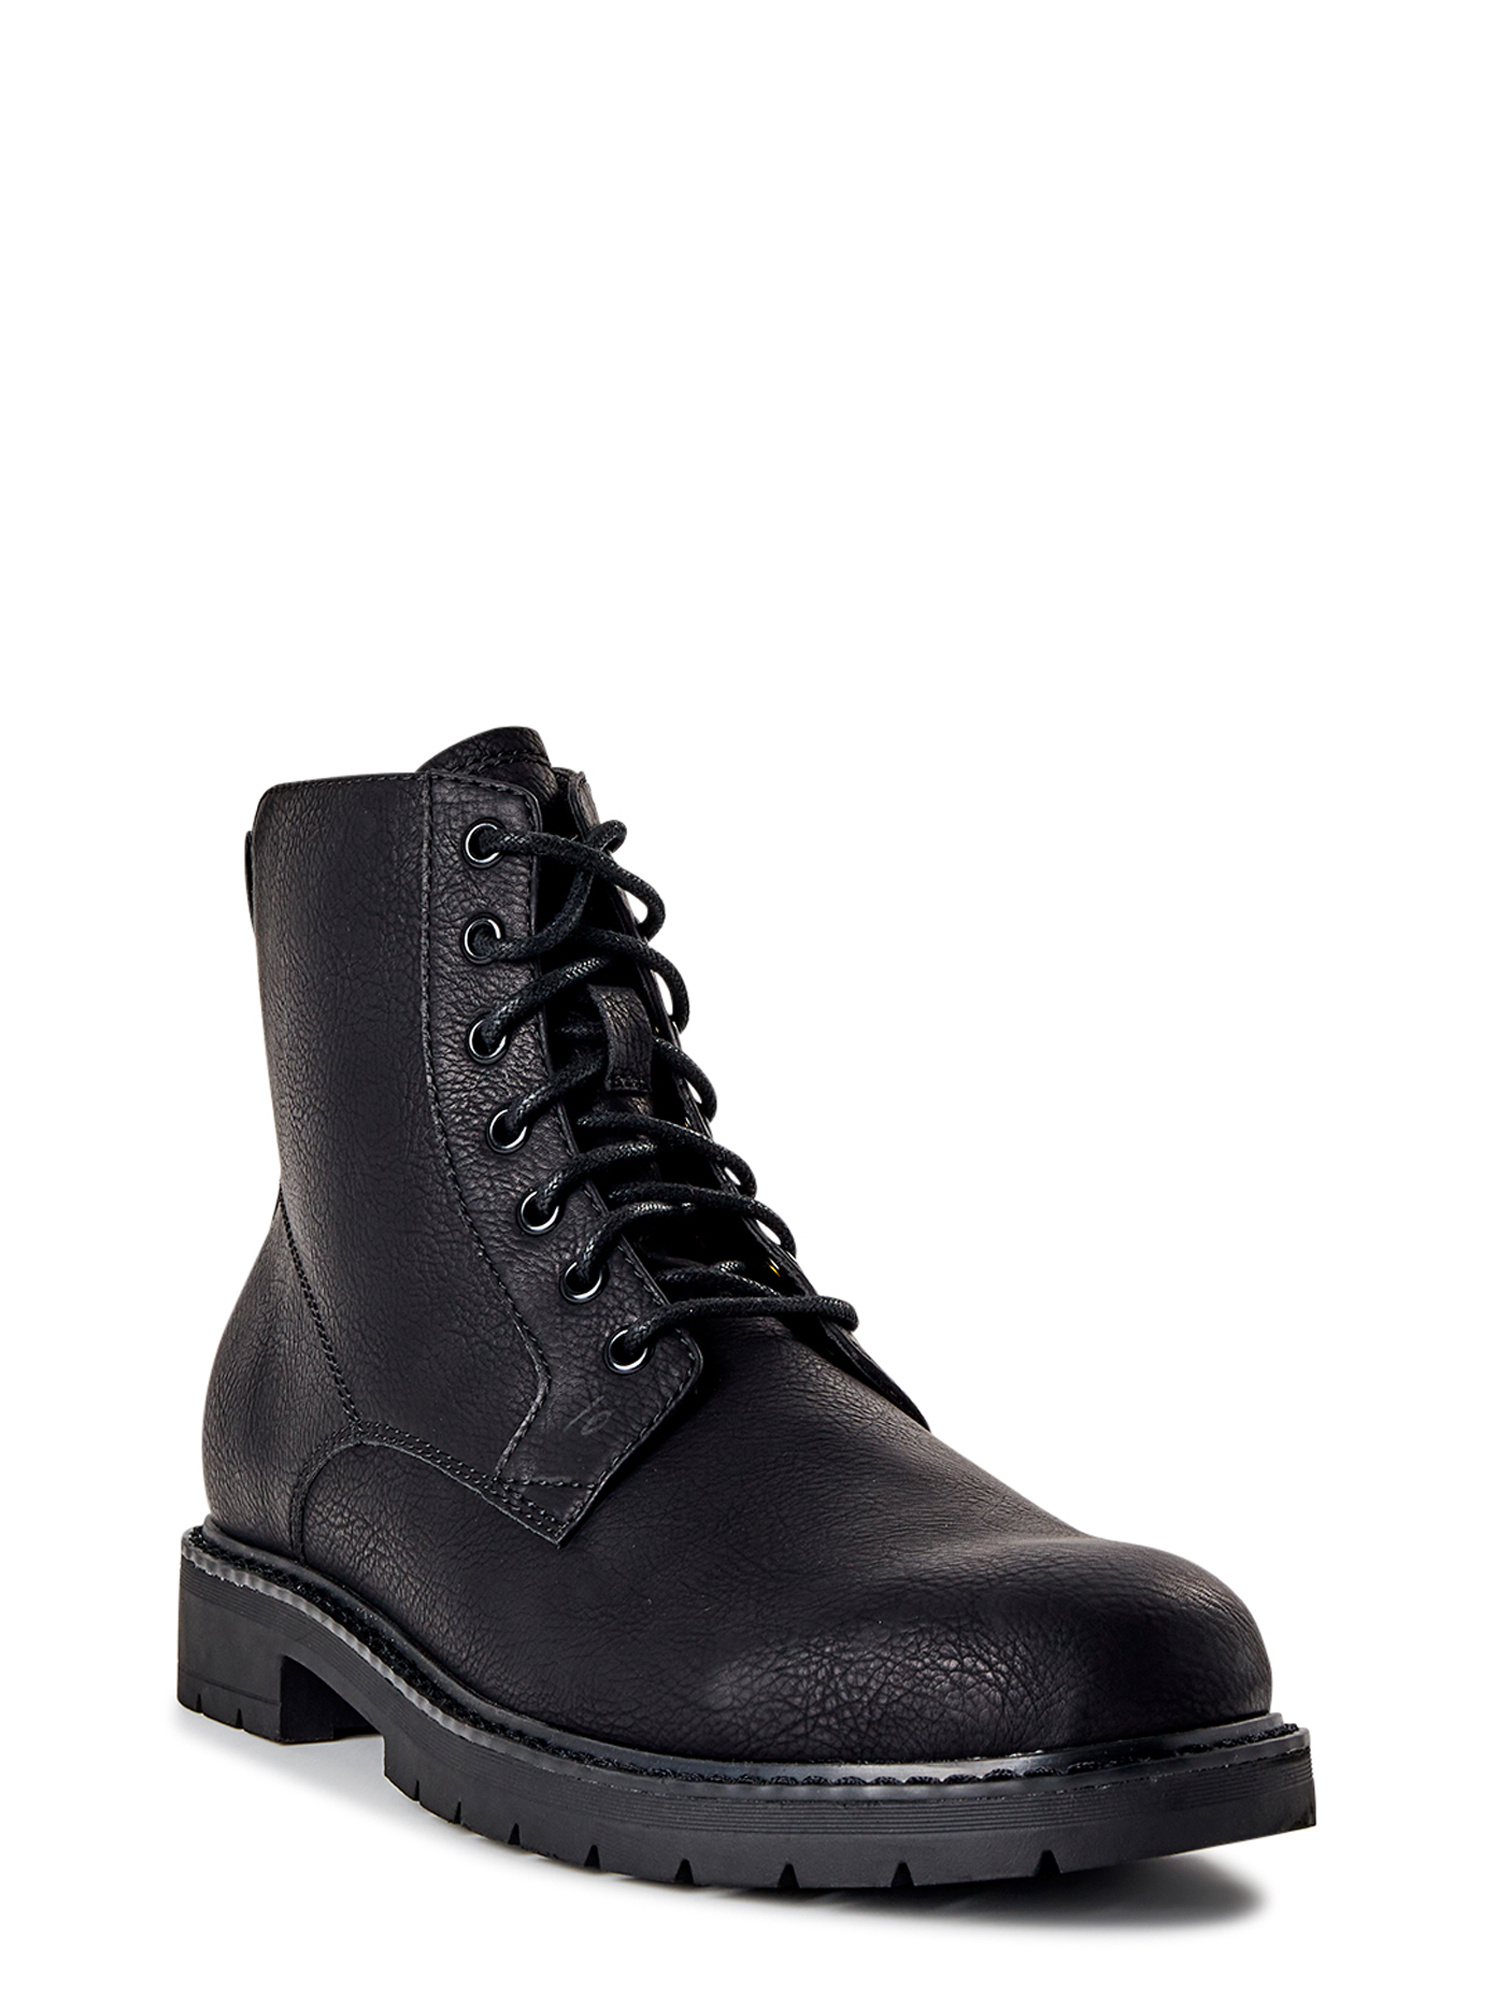 PORTLAND by Portland Boot Company Men's Casual Lace-up Boots - image 1 of 6